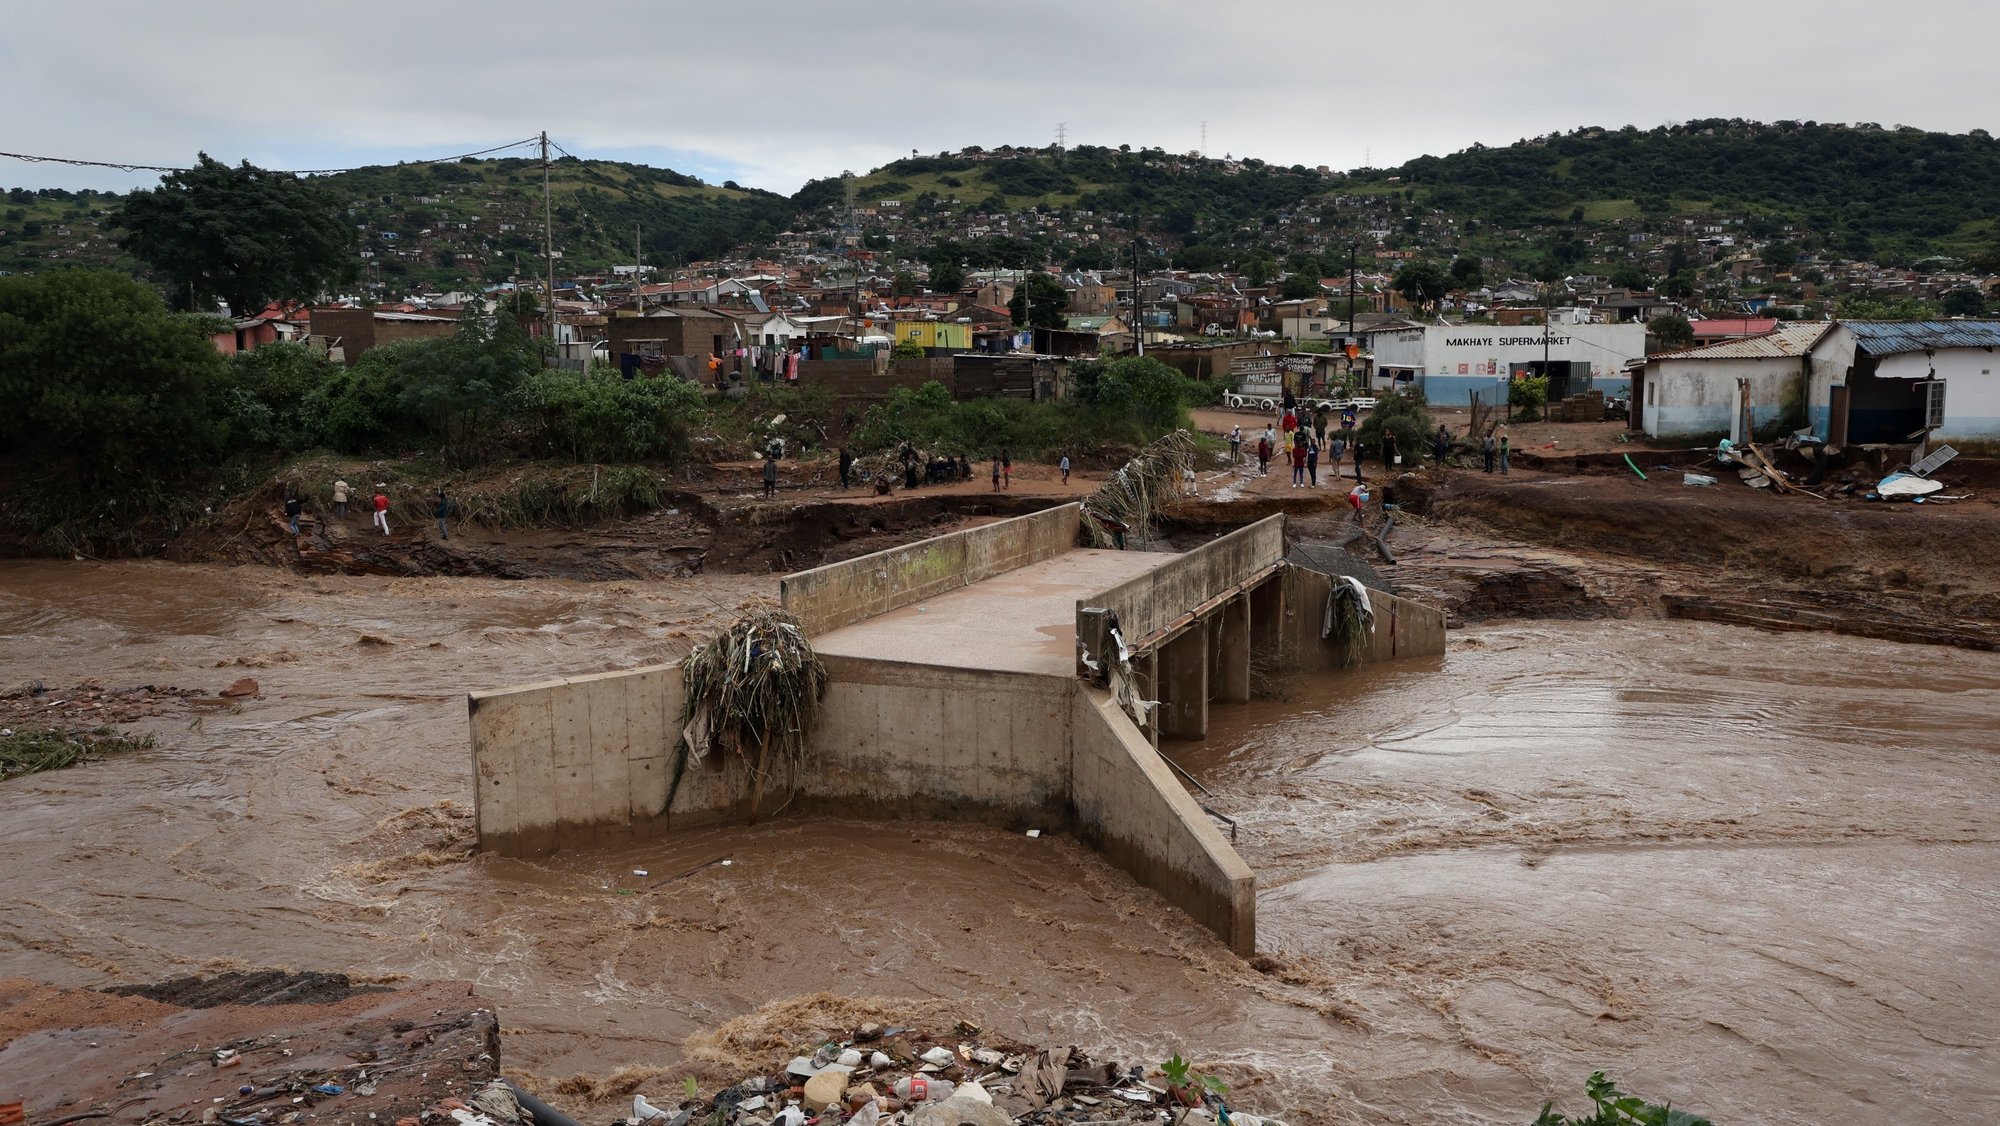 epa09886250 A river runs around a damaged bridge after heavy rains destroyed it near Durban, South Africa, 12 April 2022. At least 45 people have died as a result of heavy flooding in the Eastern Coastal area. Key roads in the area have been damaged and as mudslides destroyed houses. The South African National Defense Force have been called in to assist.  EPA/STR